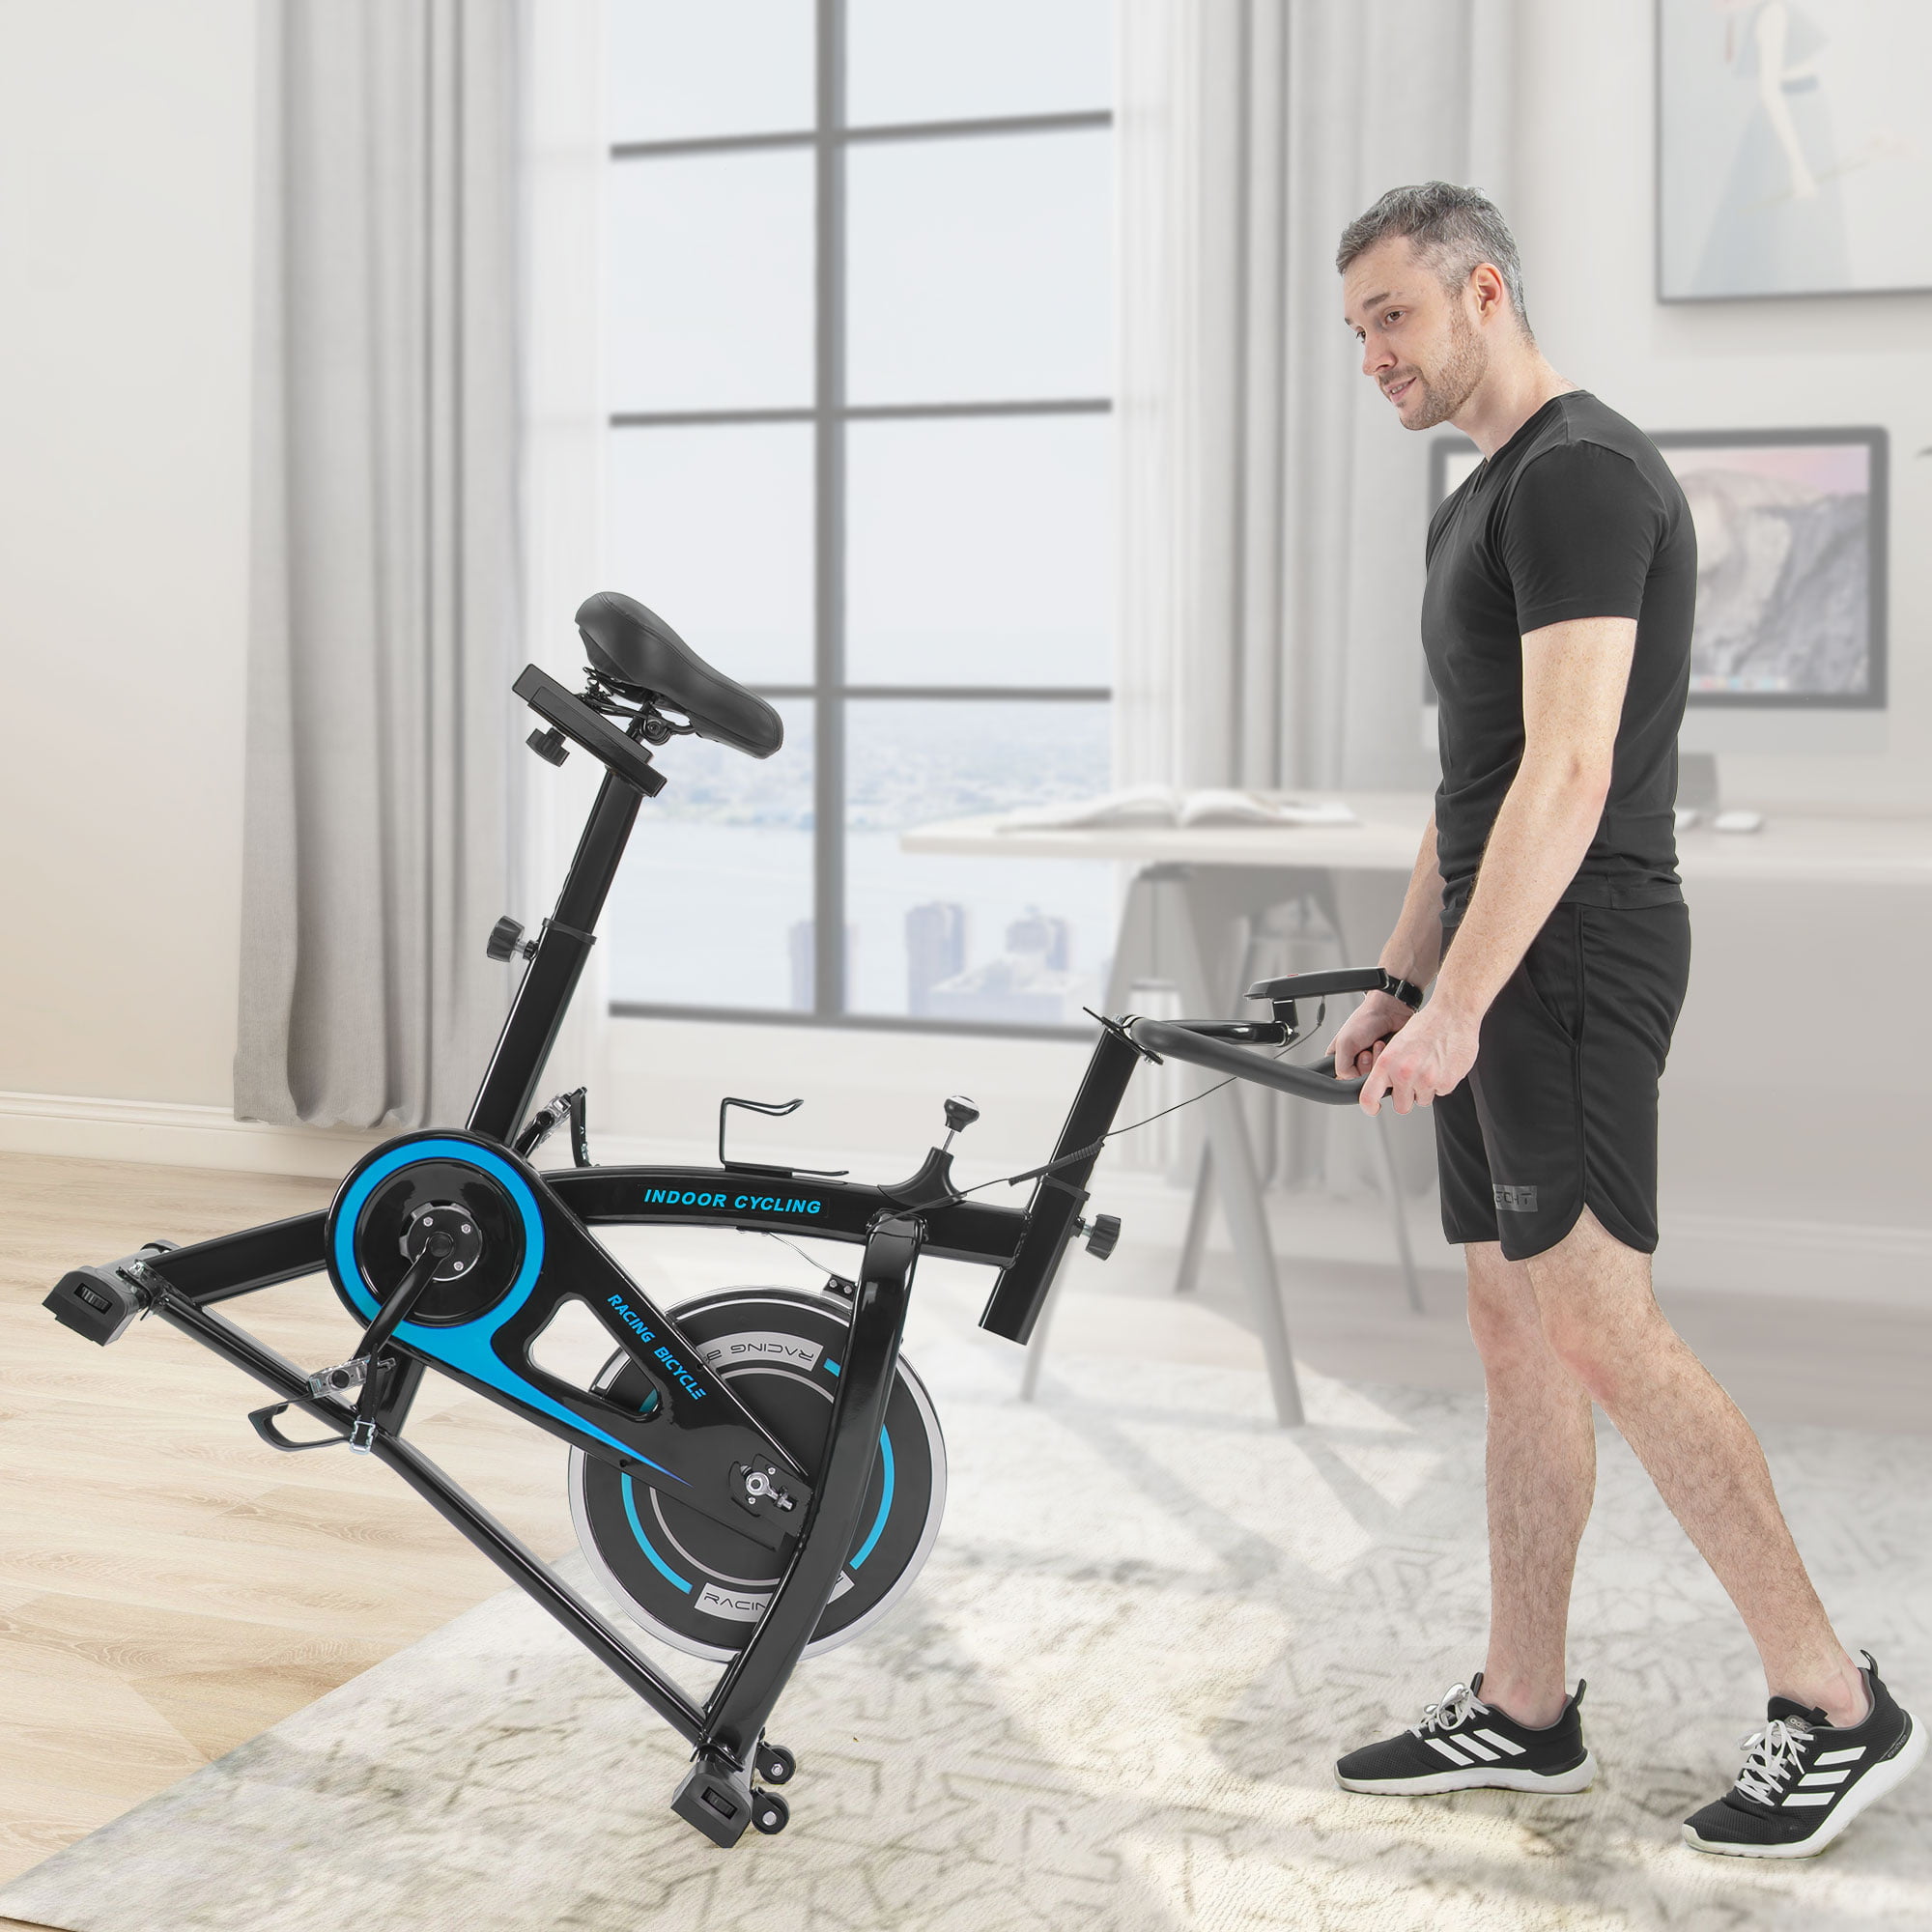 Details about   Exercise Bike Fitness Gym Indoor Cycling Stationary Bicycle Cardio Workout Home 